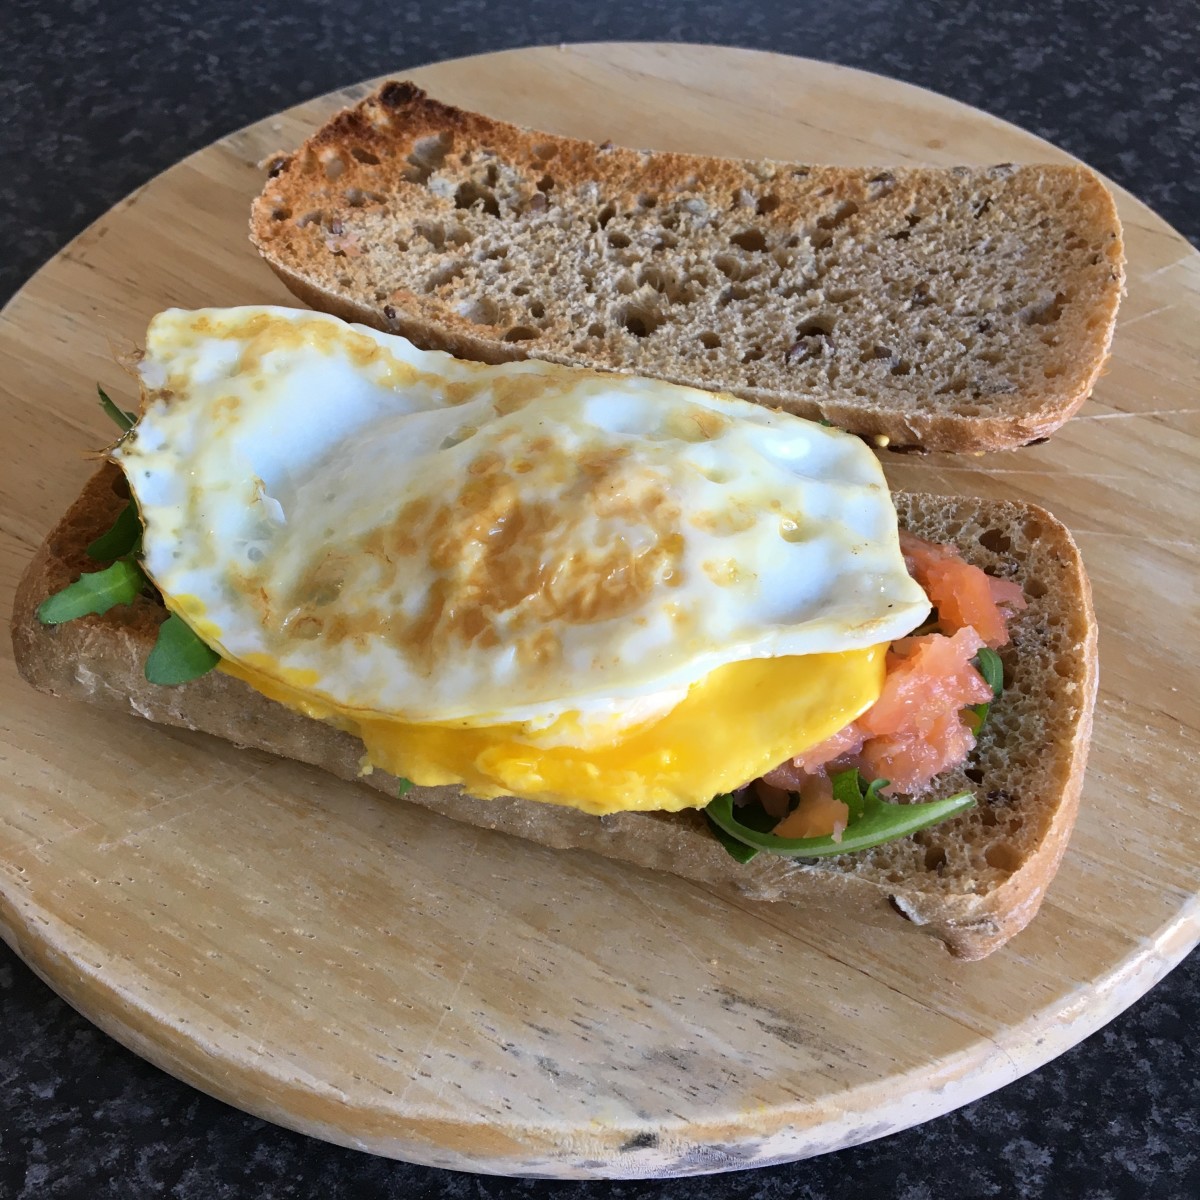 Fried duck egg with smoked salmon and rocket toasted ciabatta sandwich